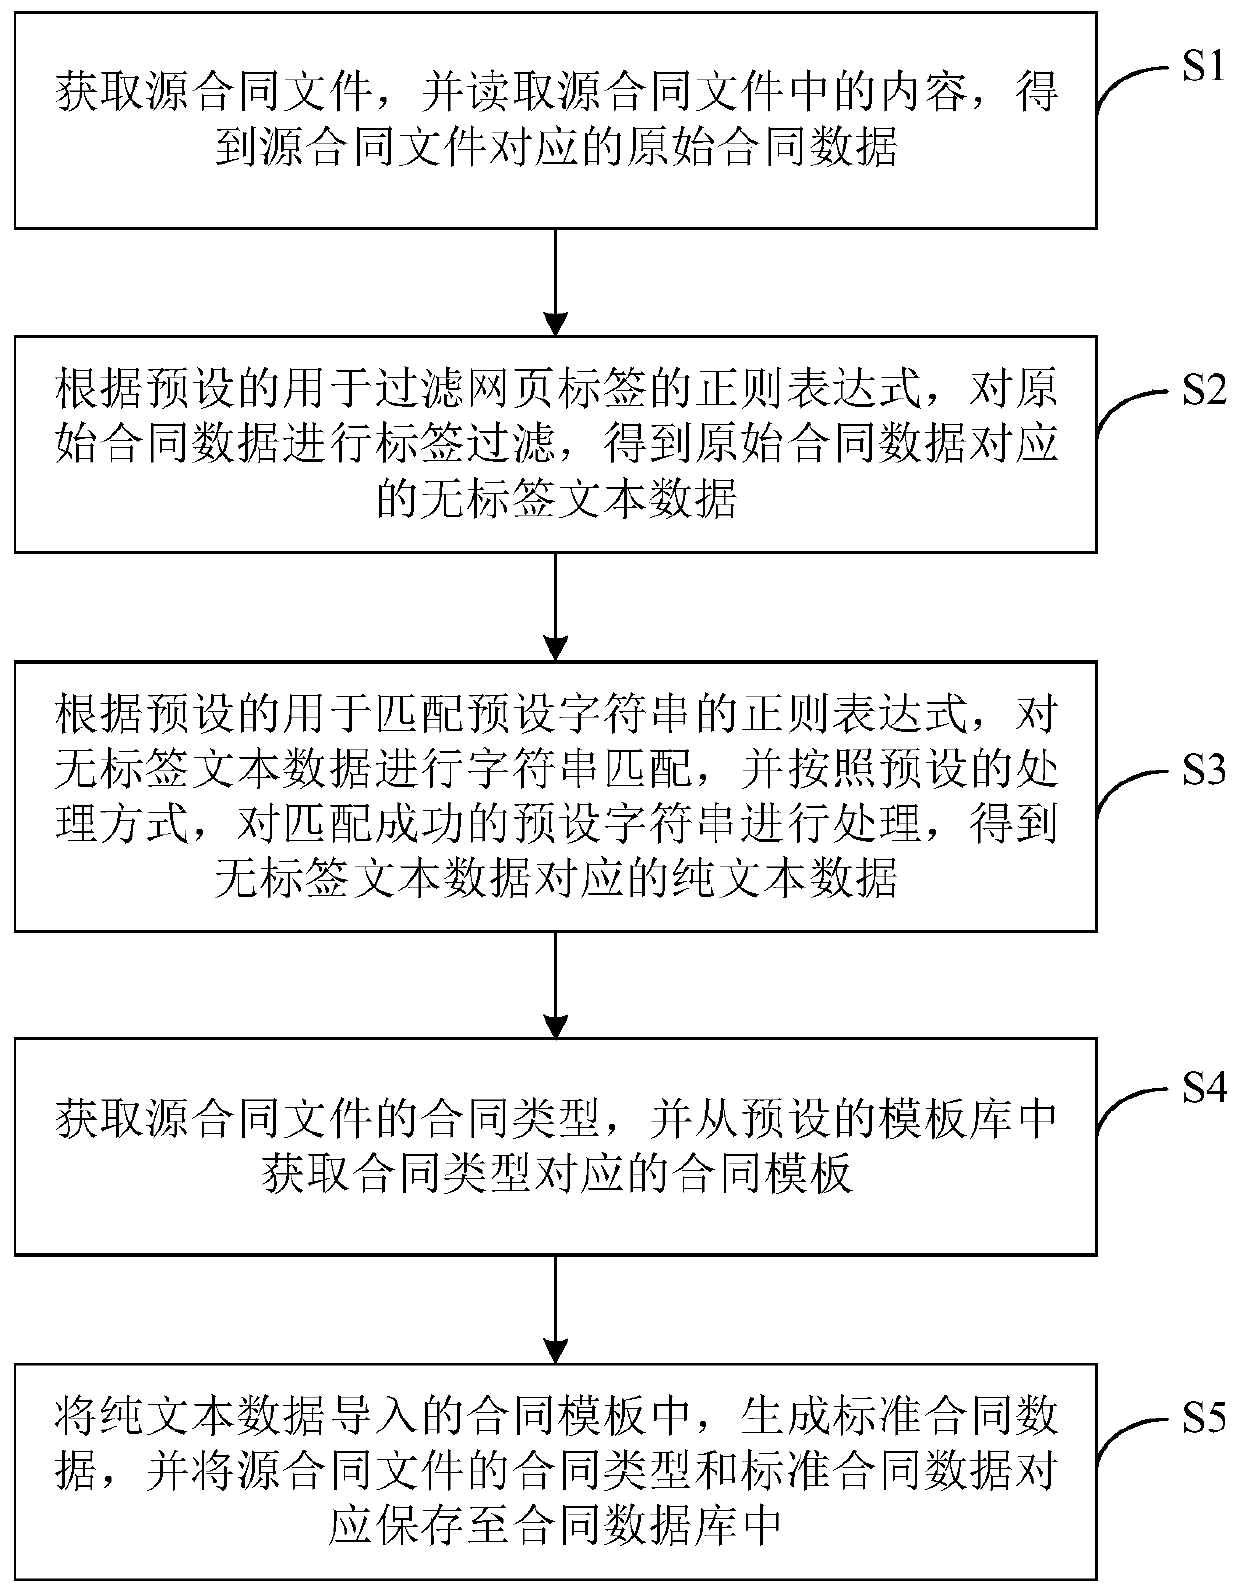 Contract text data processing method and device, equipment and storage medium